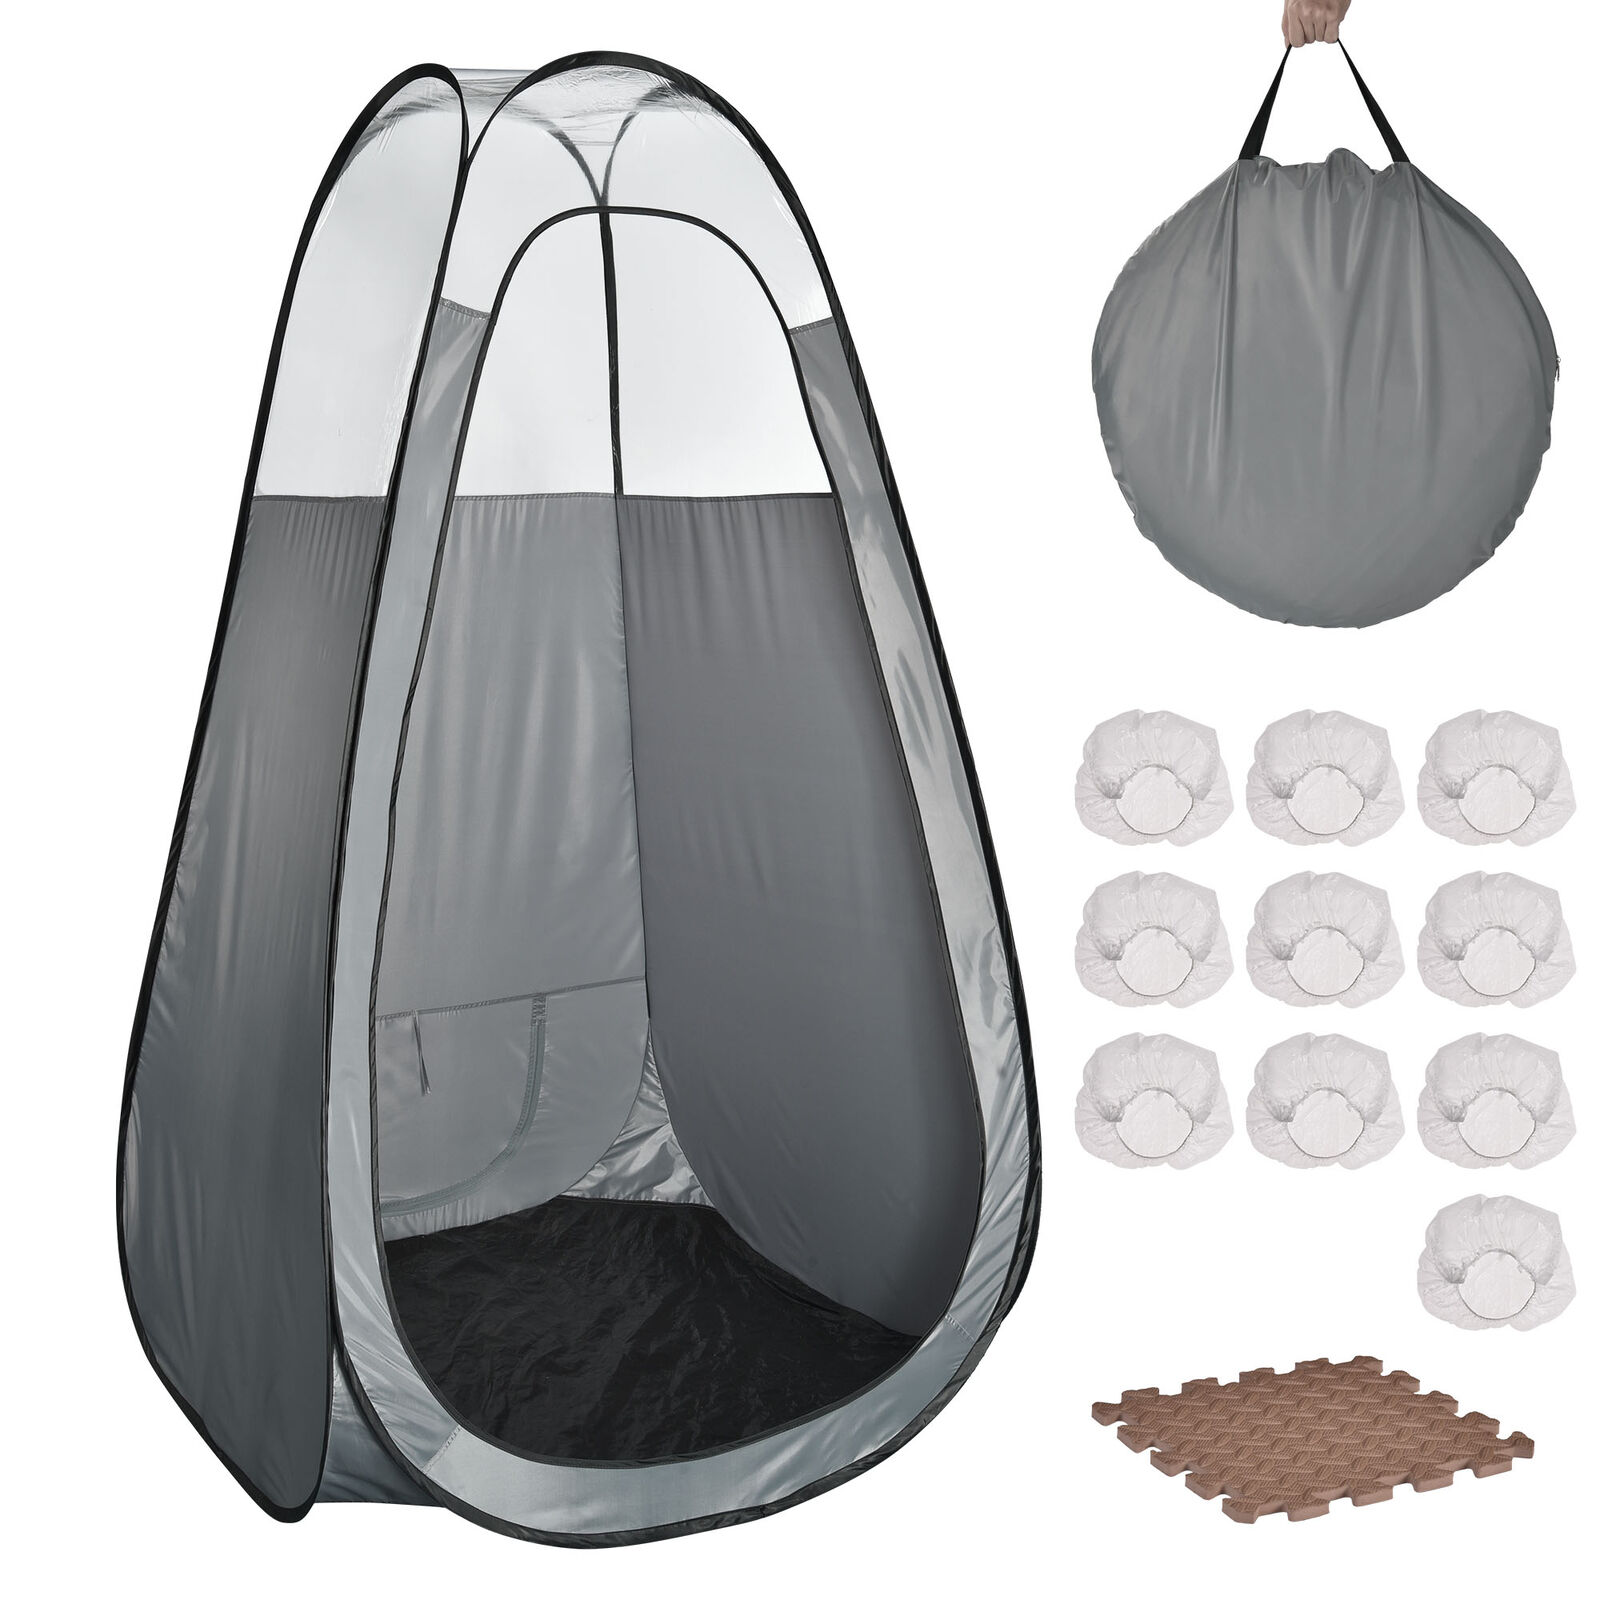 Portable Spray Tanning Tent Pop Up Oxford Booth Airbrush Sunless Clear Window